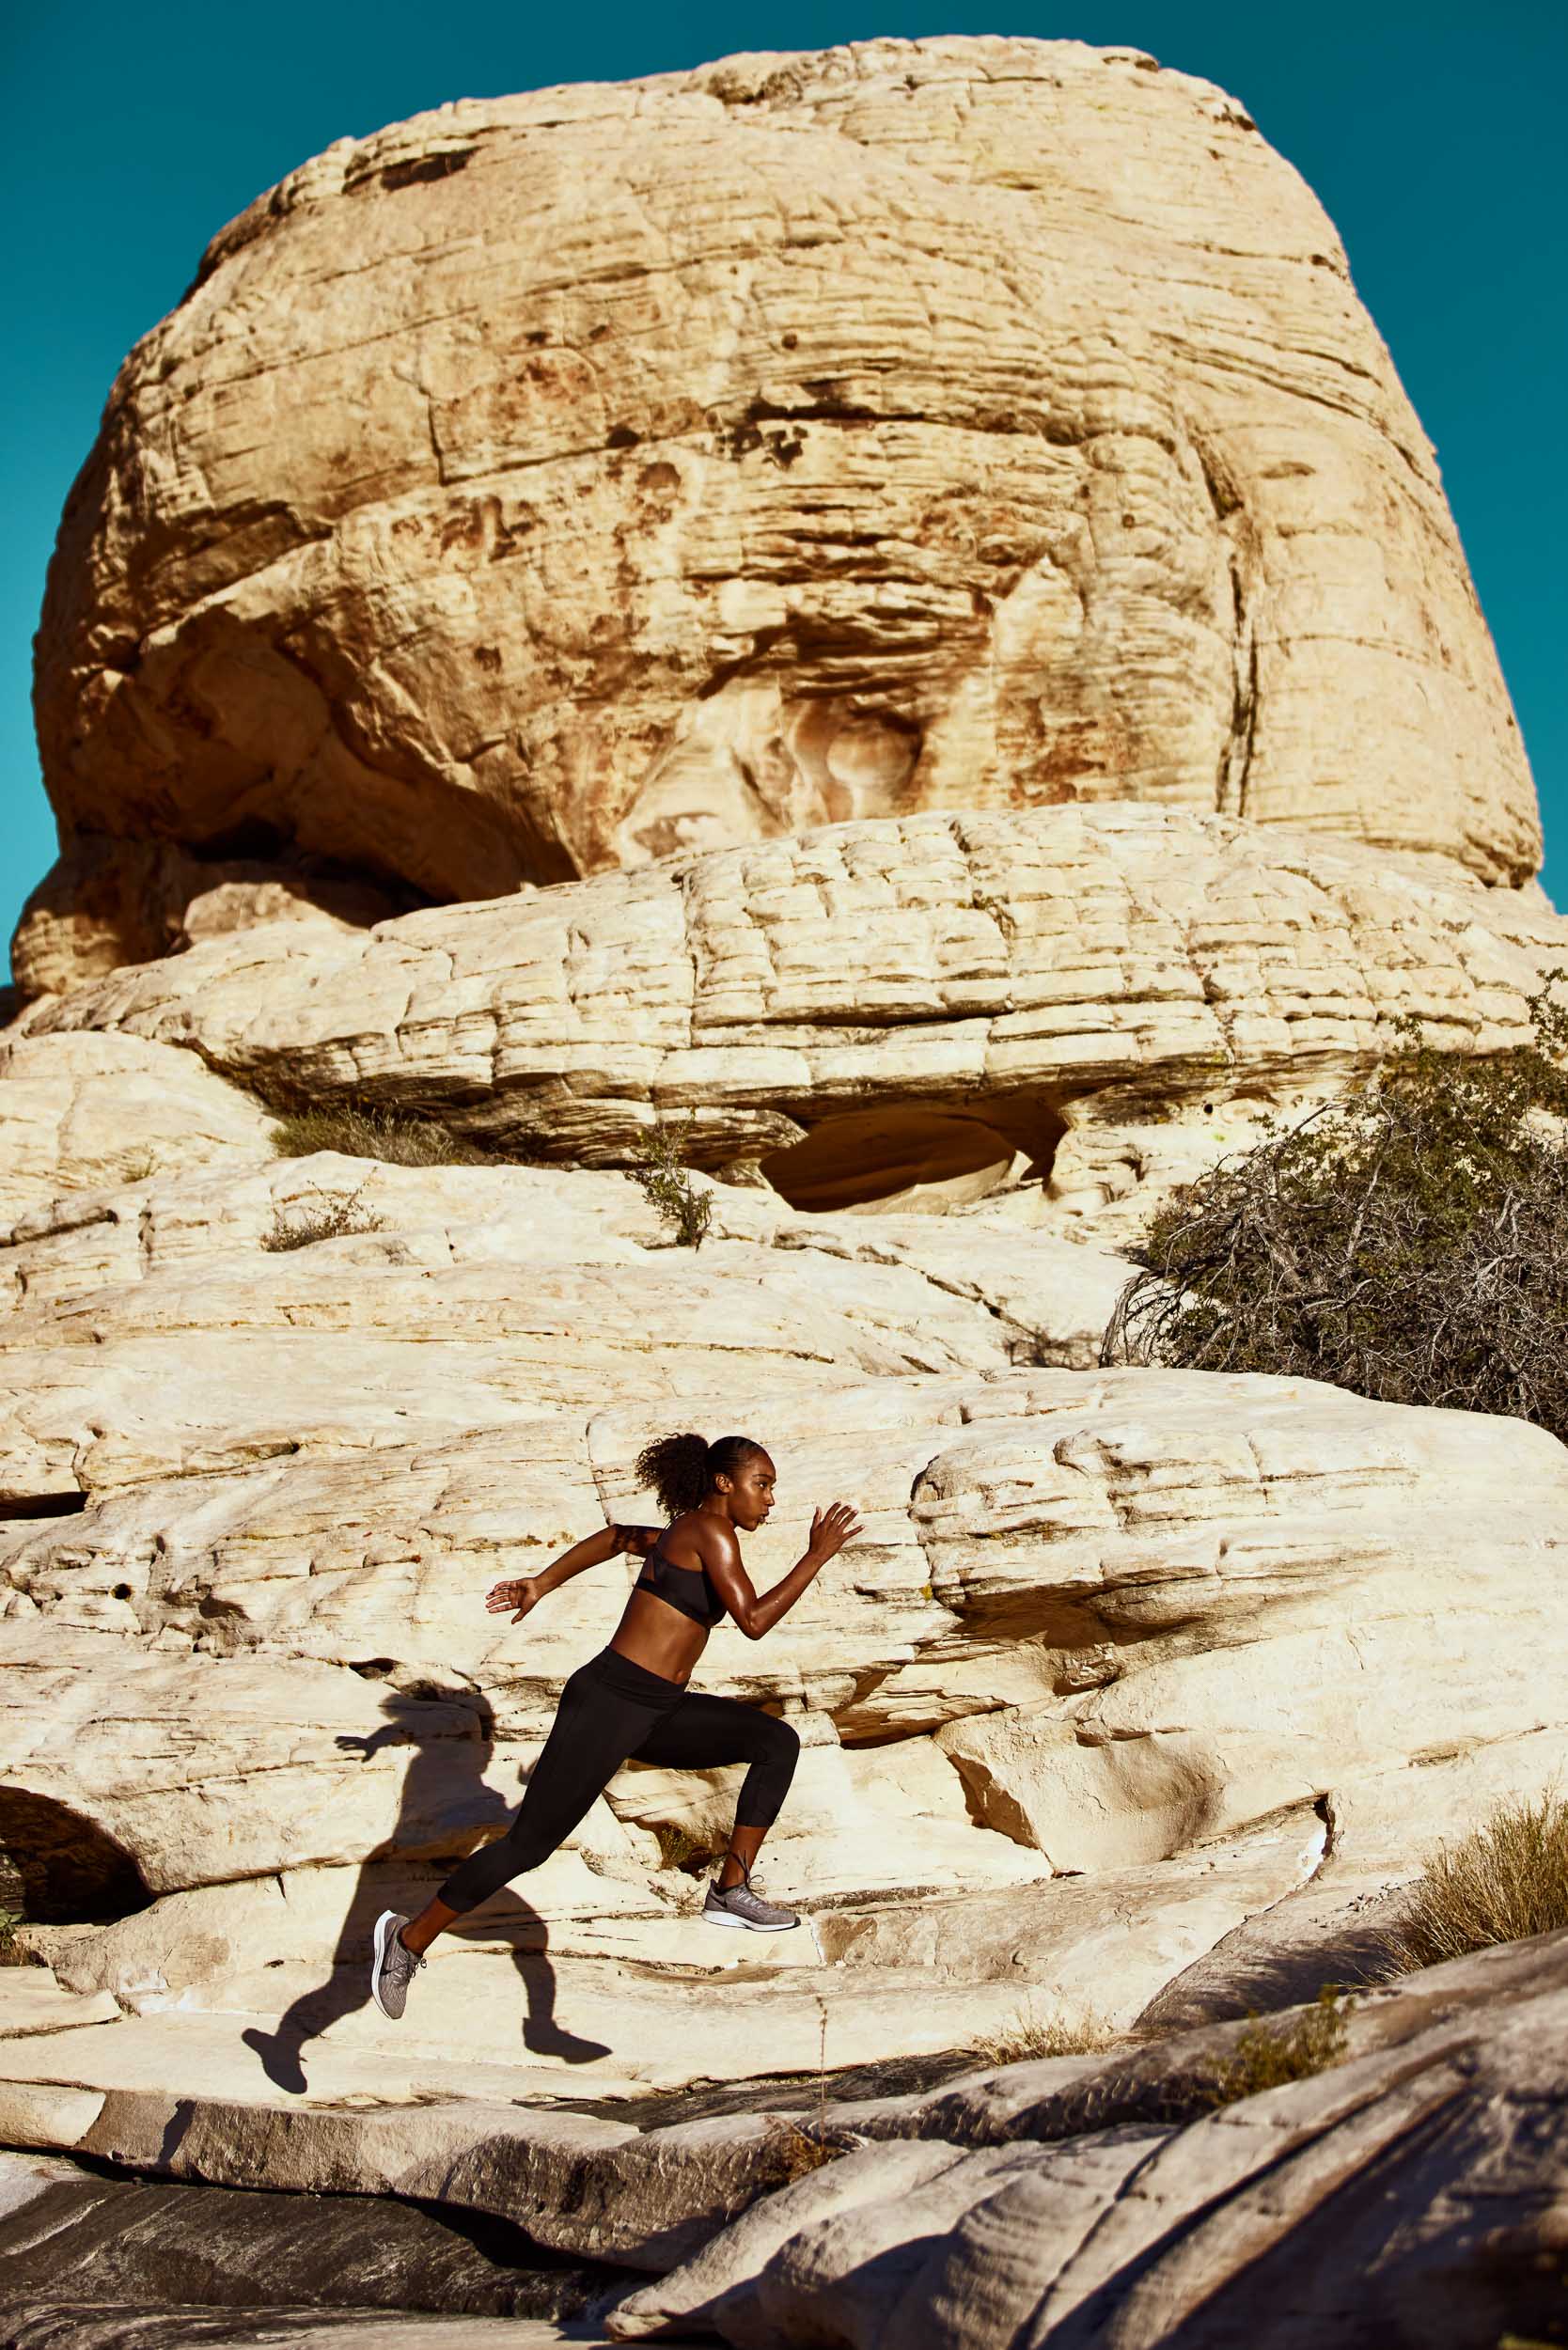 ADVENTURE ACTIVE LIFESTYLE FITNESS ADVERTISING PHOTOGRAPHER ADIDAS RUN CAMPAIGN PHOTOGRAPHY